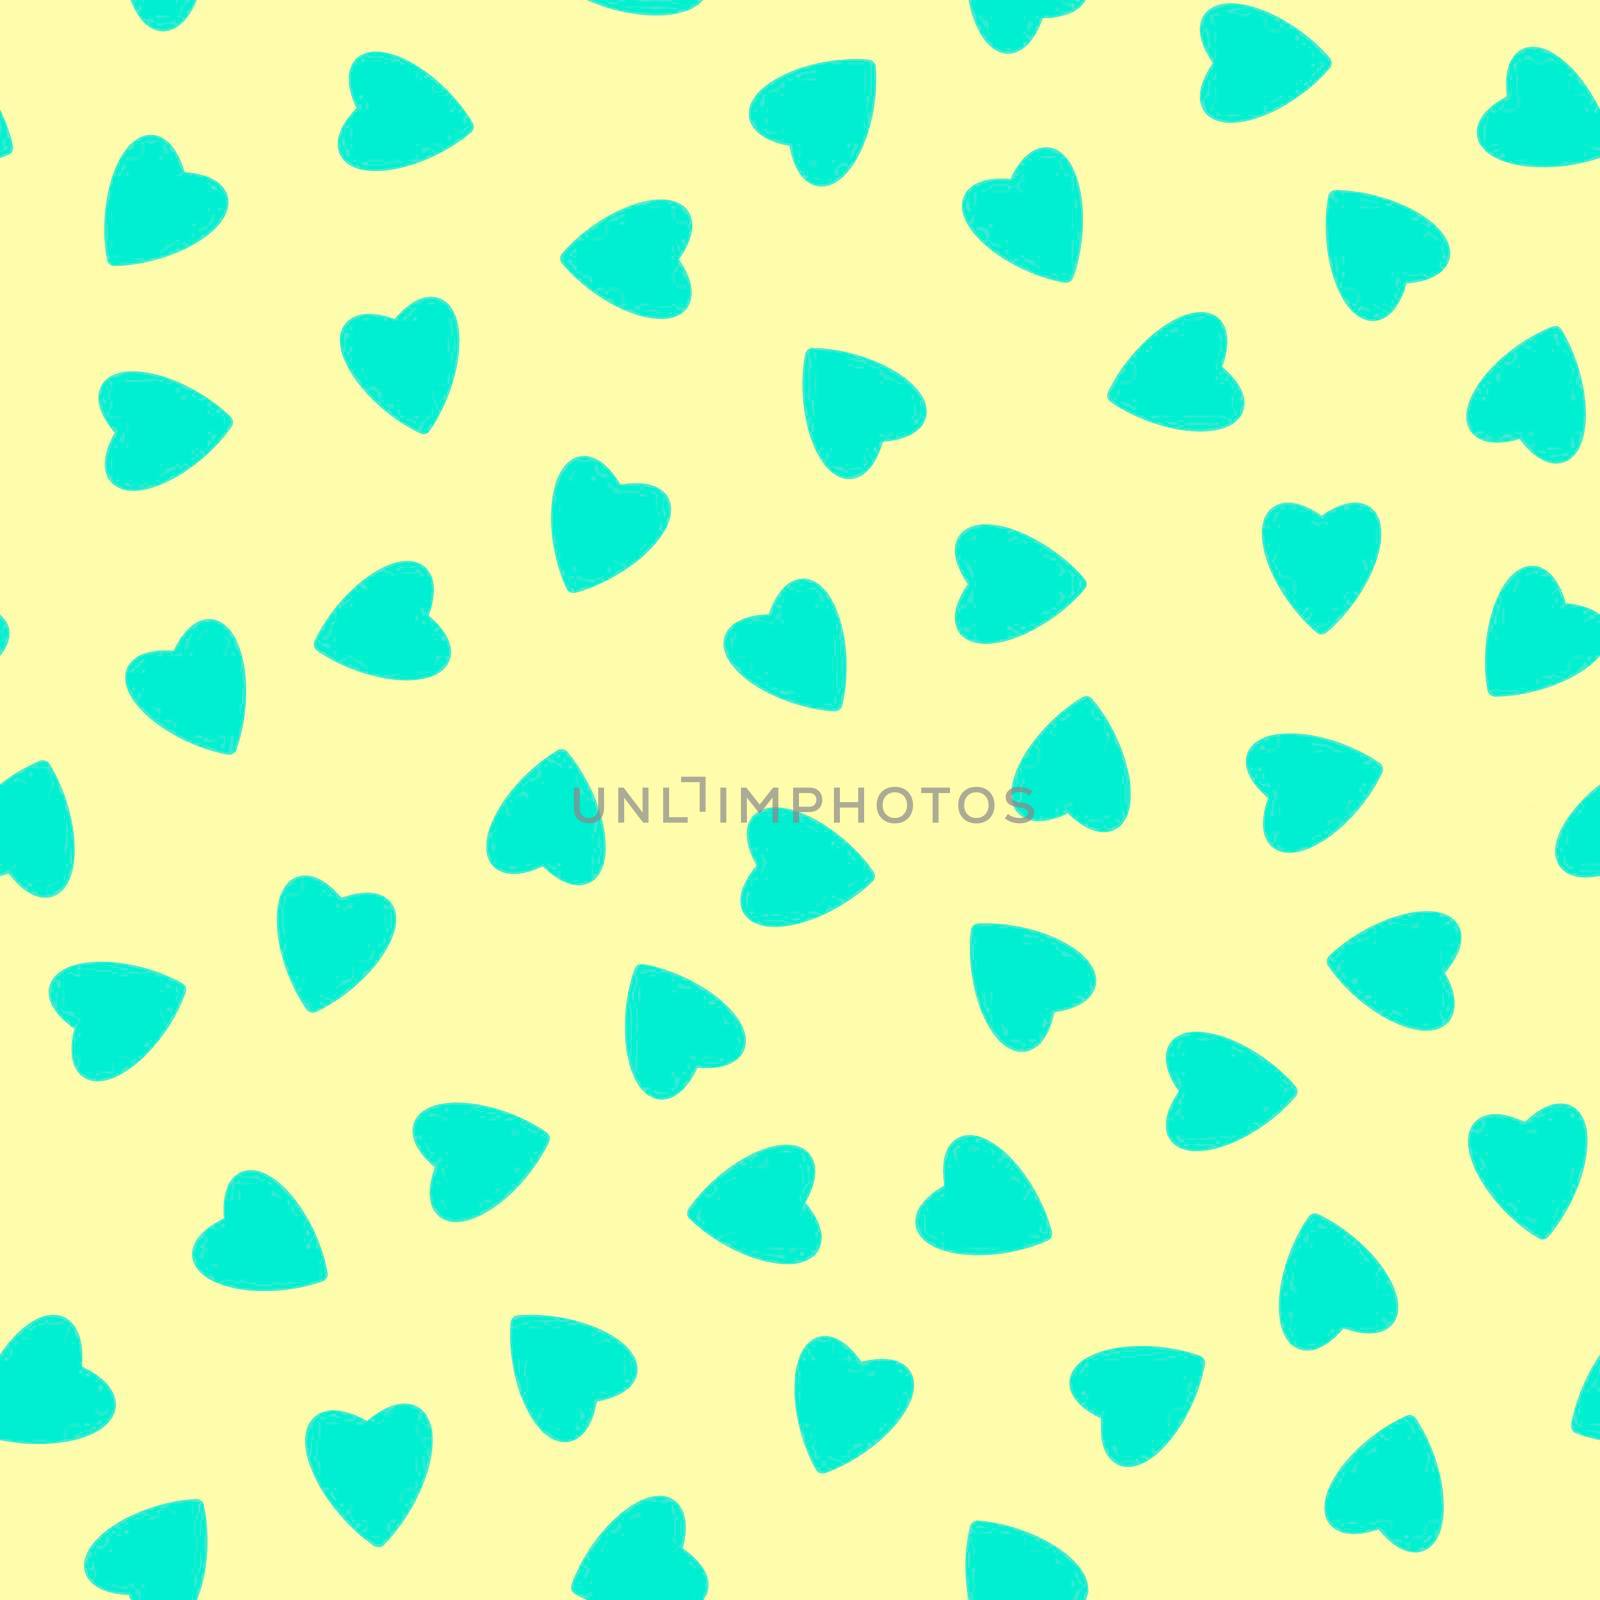 Simple hearts seamless pattern,endless chaotic texture made of tiny heart silhouettes.Valentines,mothers day background.Great for Easter,wedding,scrapbook,gift wrapping paper,textiles.Azure on Ivory.